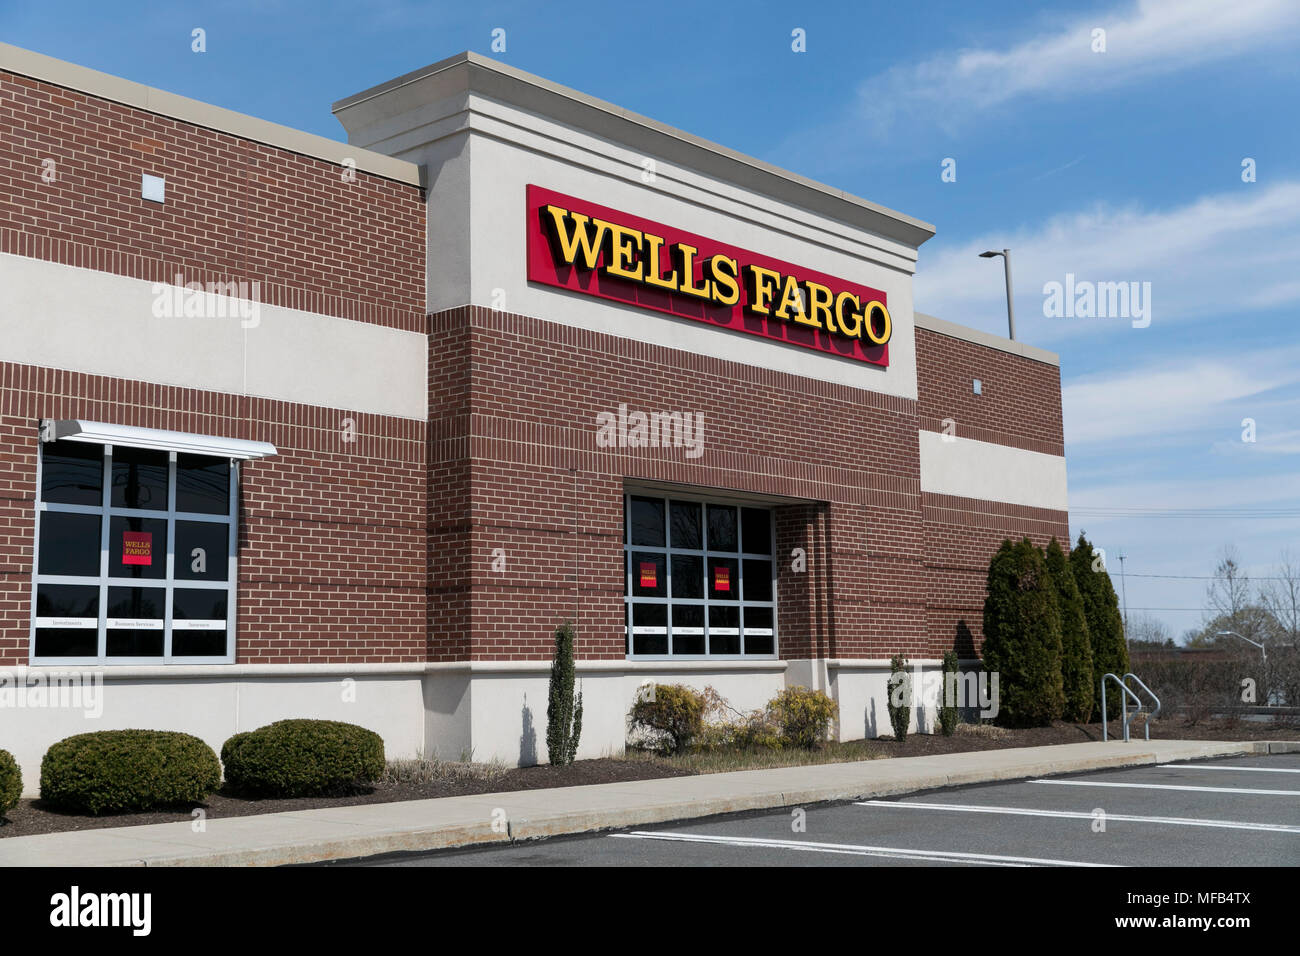 A logo sign outside of a Wells Fargo bank branch in Reading, Pennsylvania, on April 22, 2018. Stock Photo